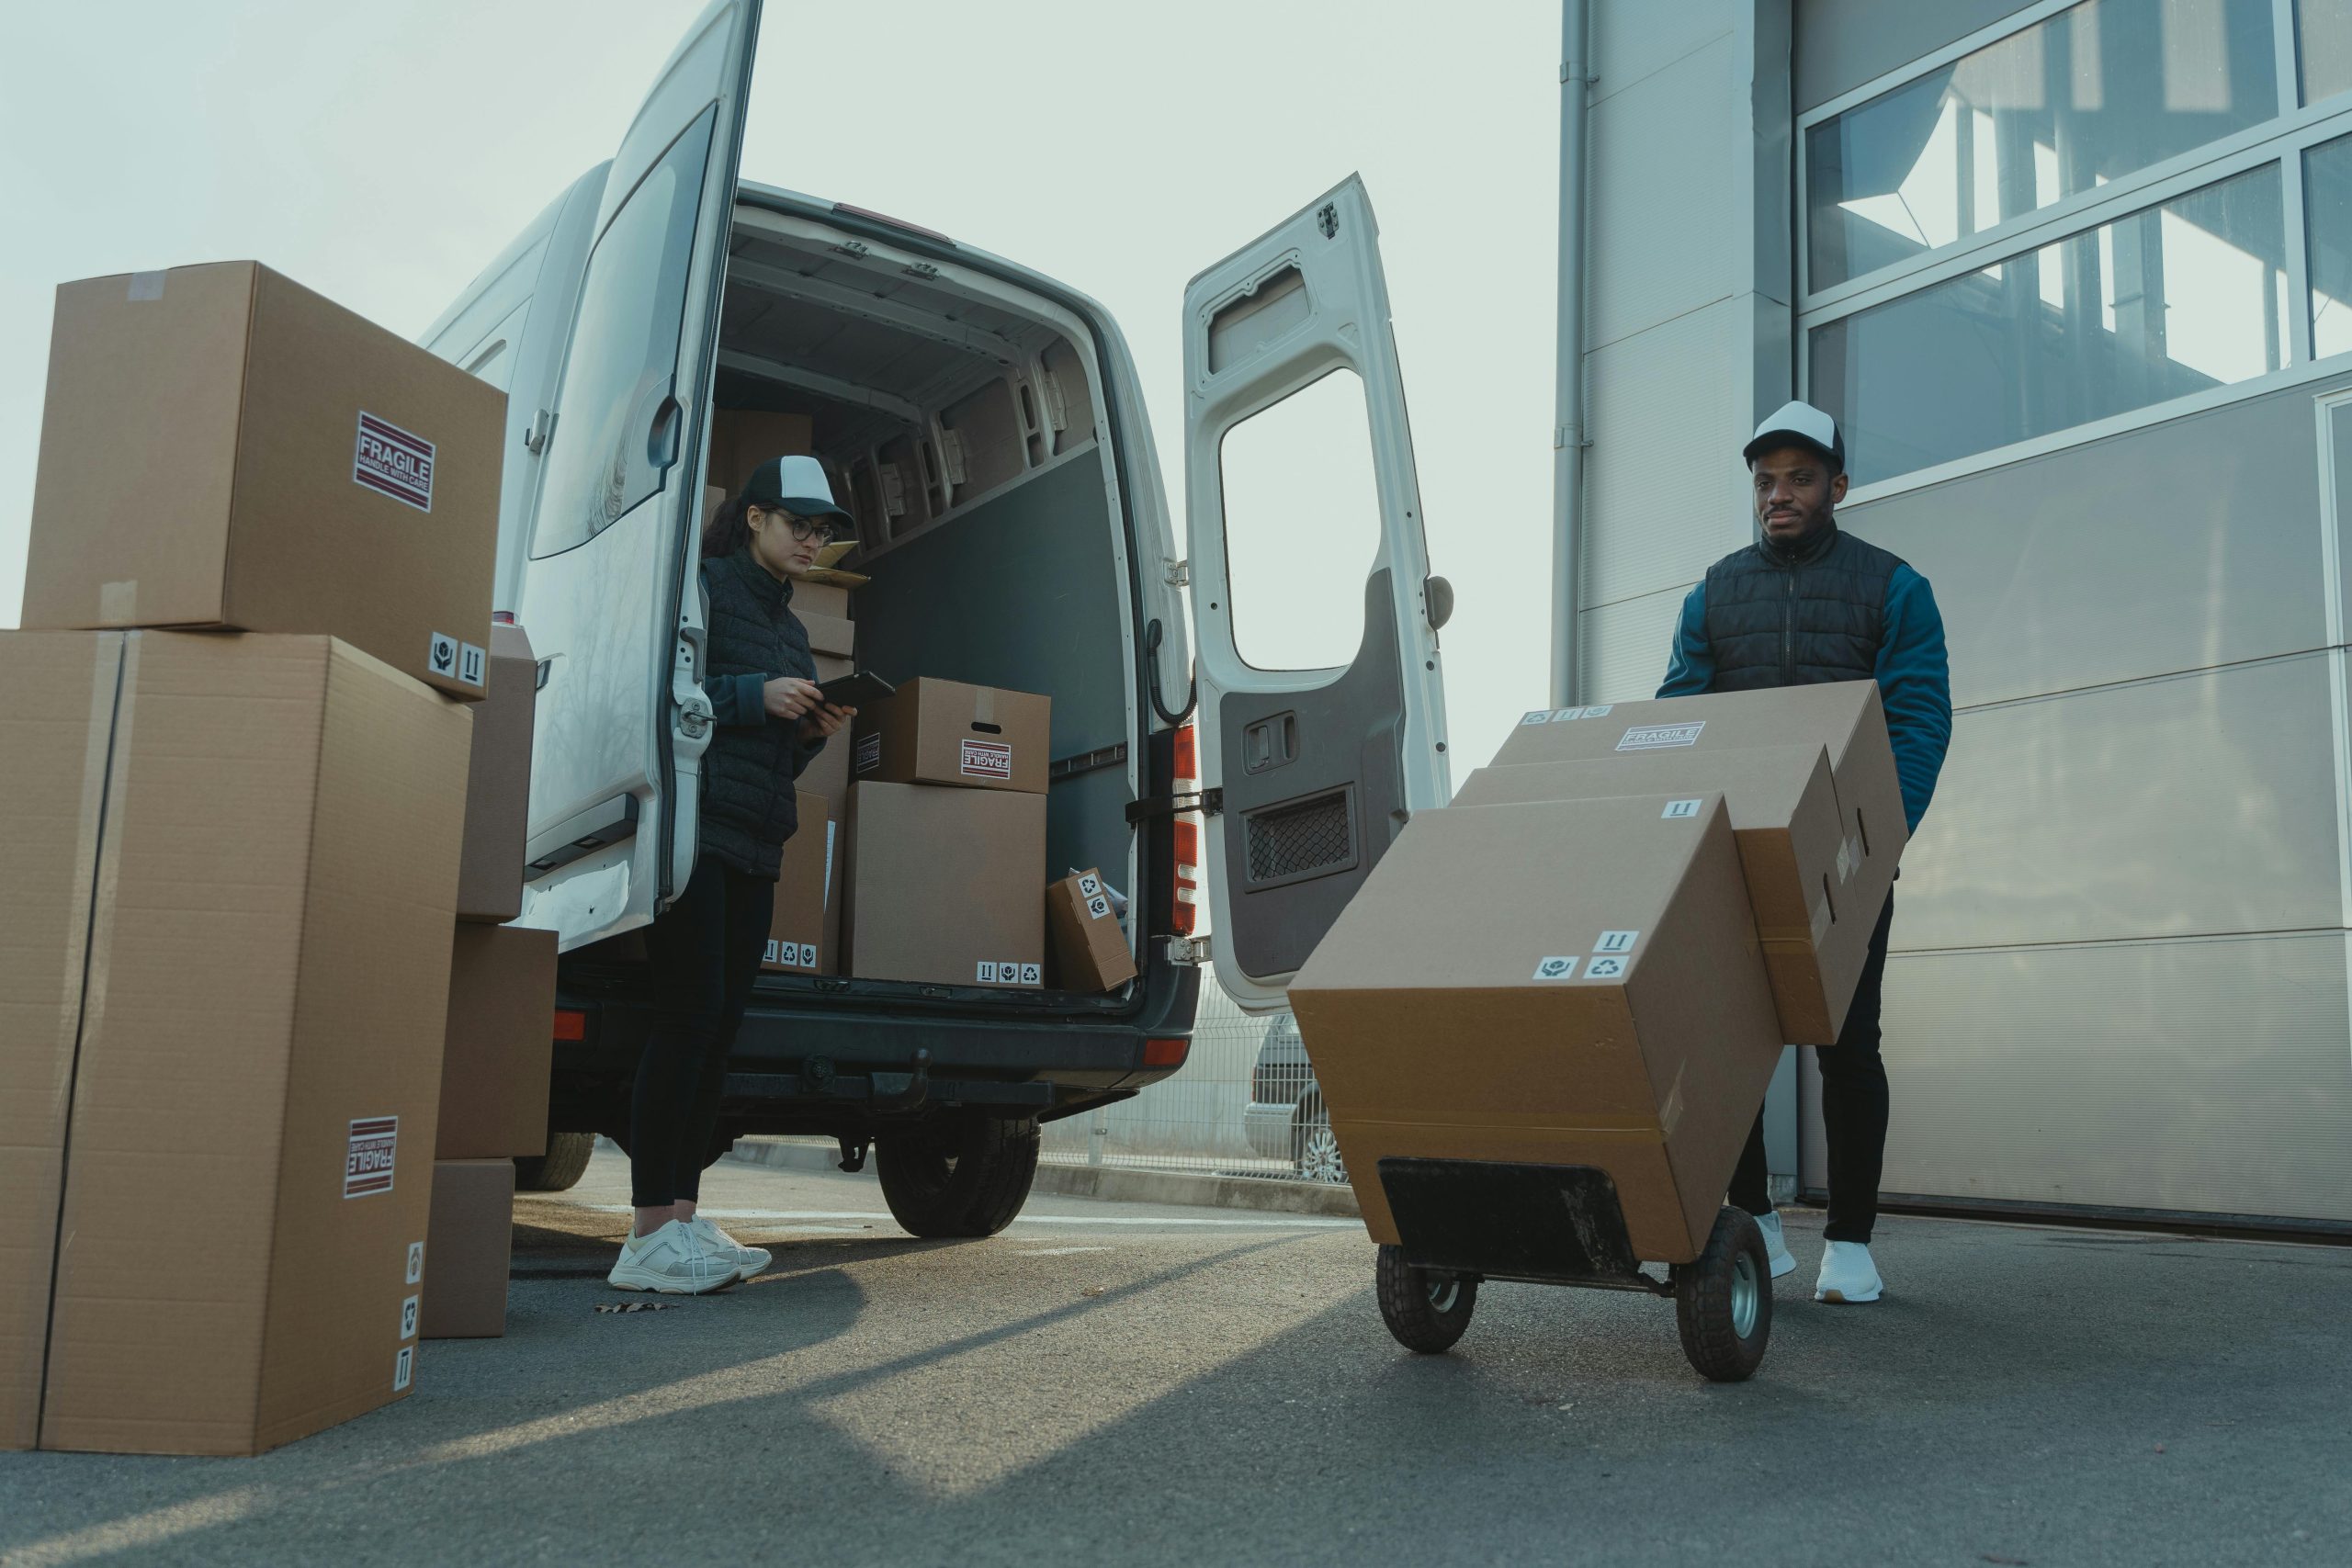 What Is Expedited Shipping and Why Do Customers Want It?